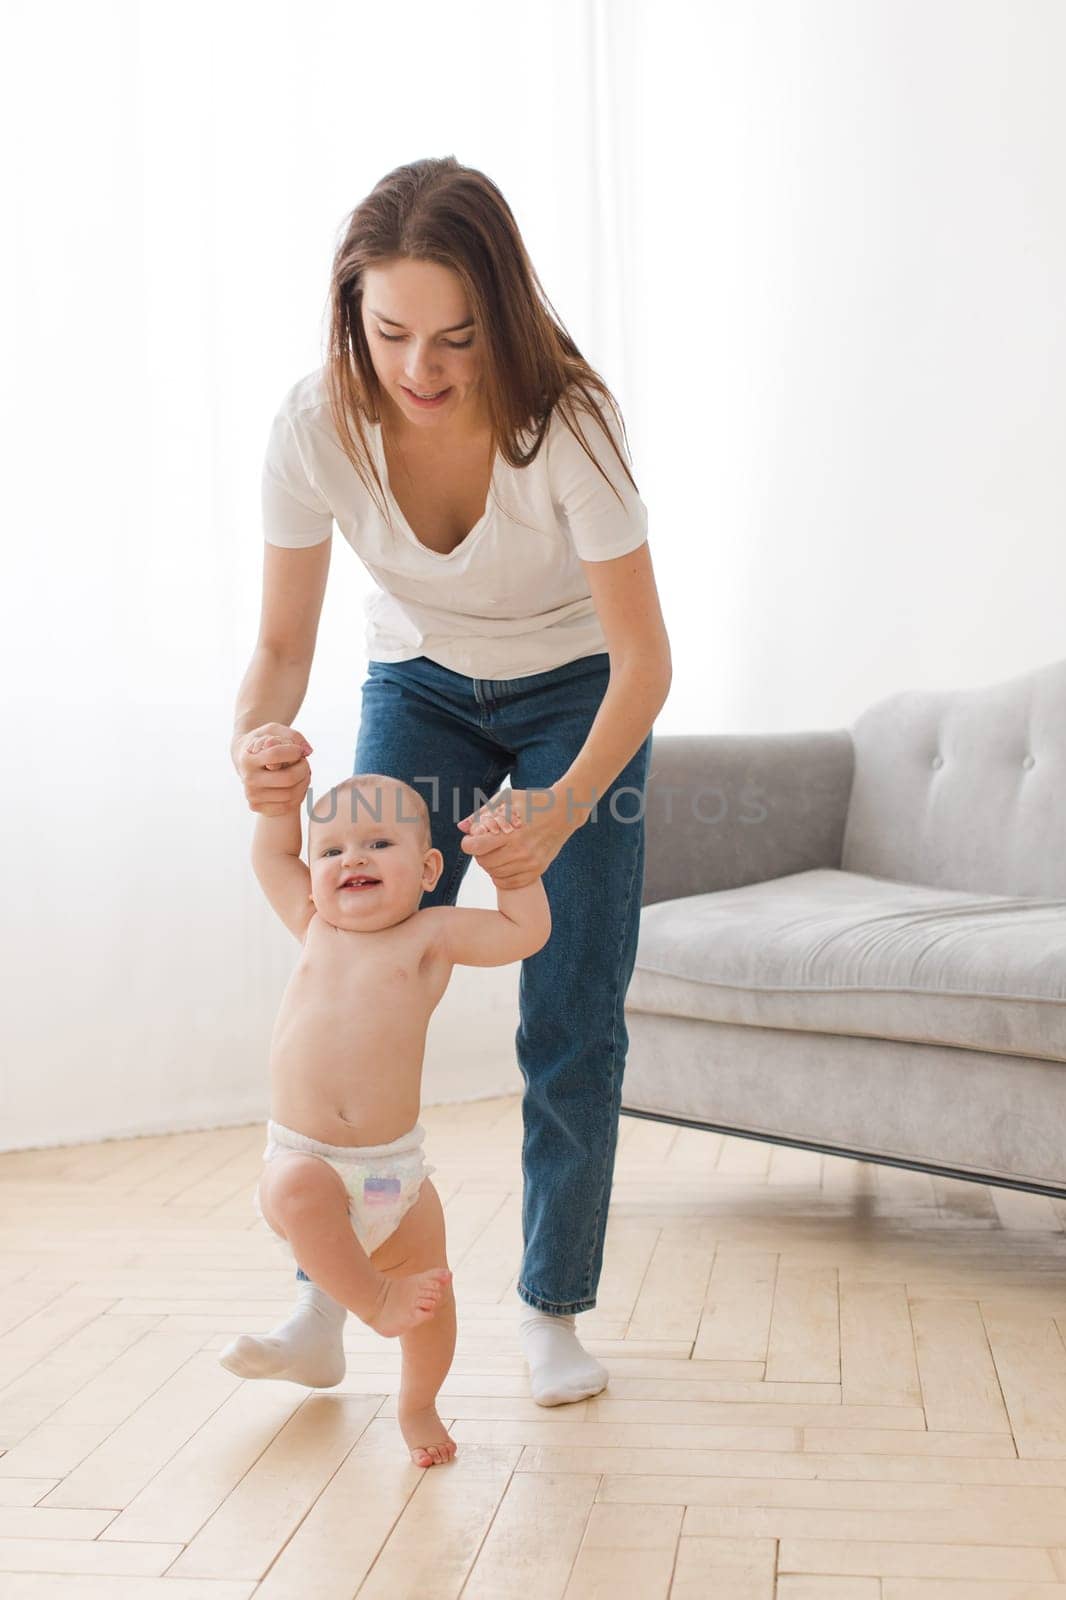 Adult woman taking care and teaching adorable toddler how to walk.